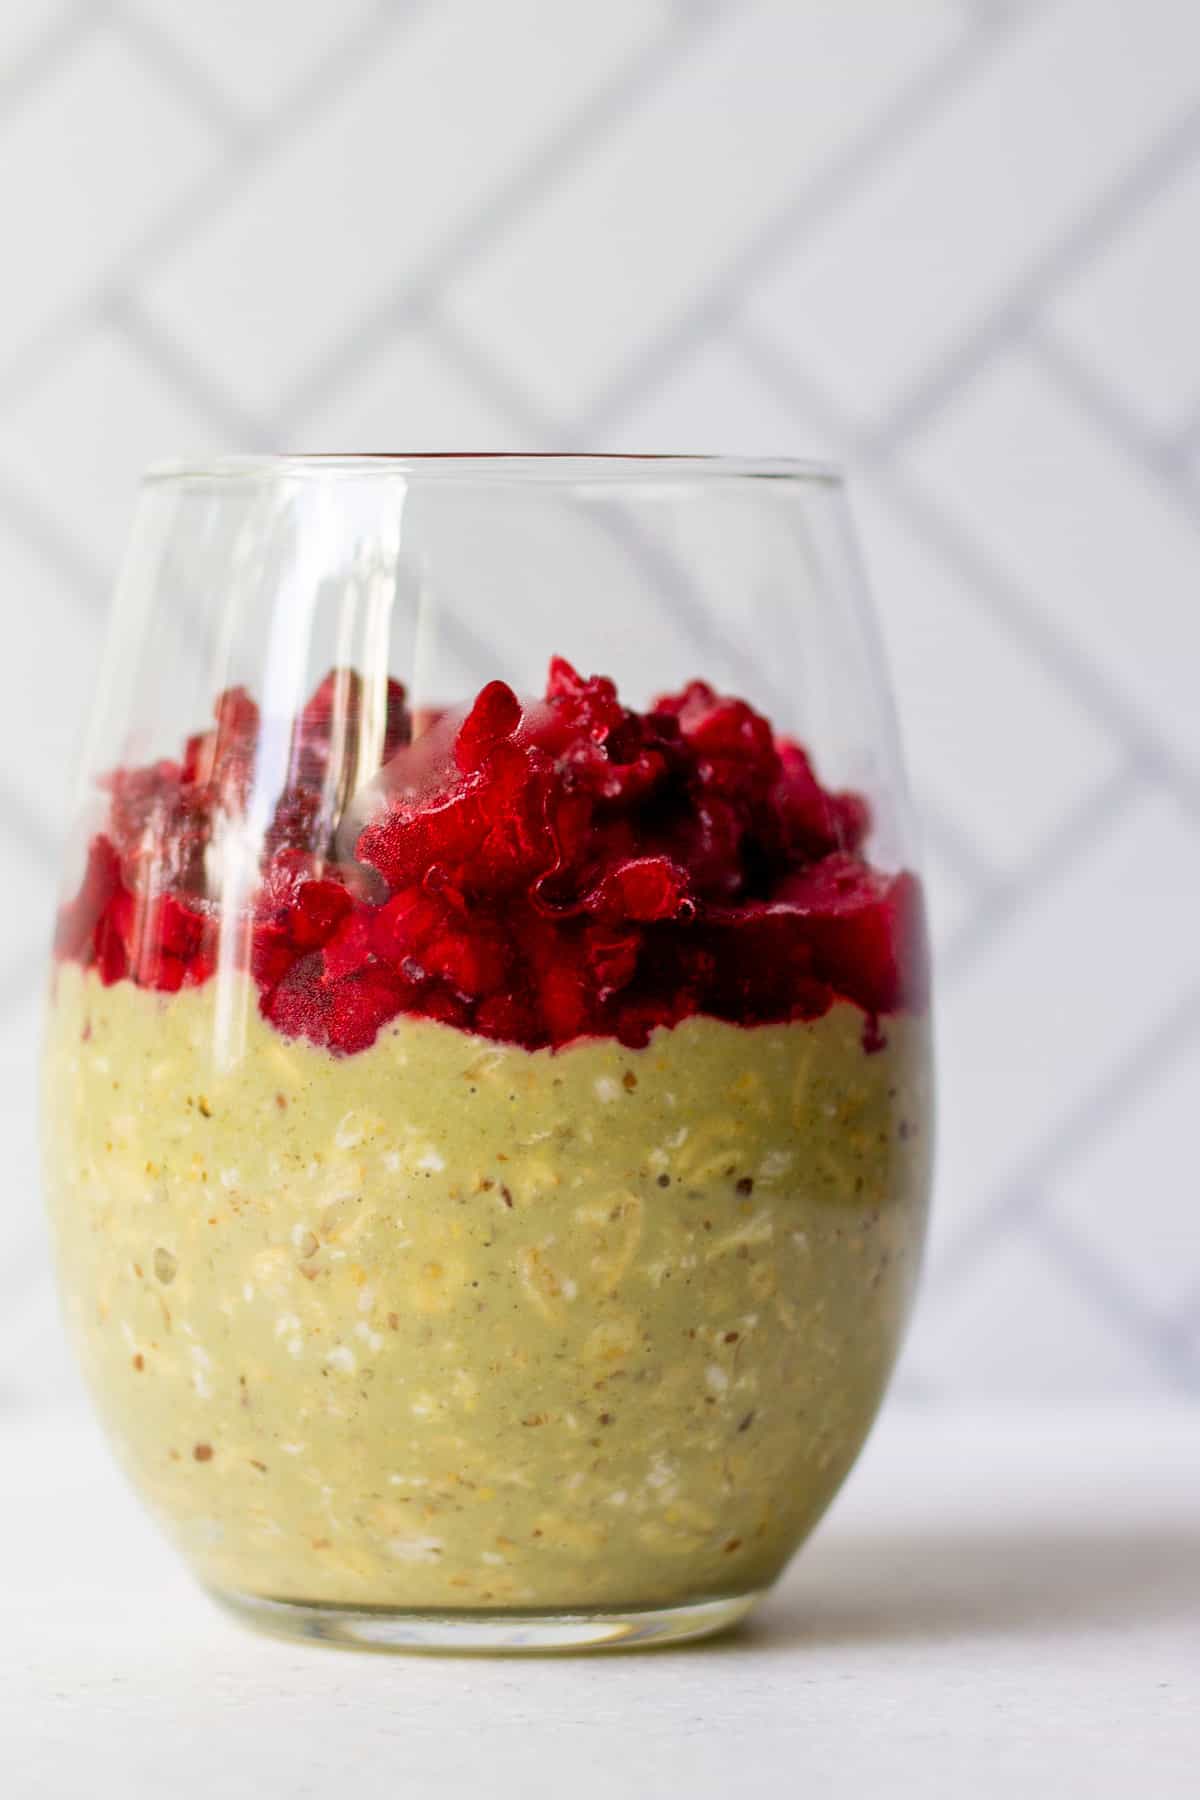 pretty glass with matcha overnight oats and thawed, frozen raspberries on top